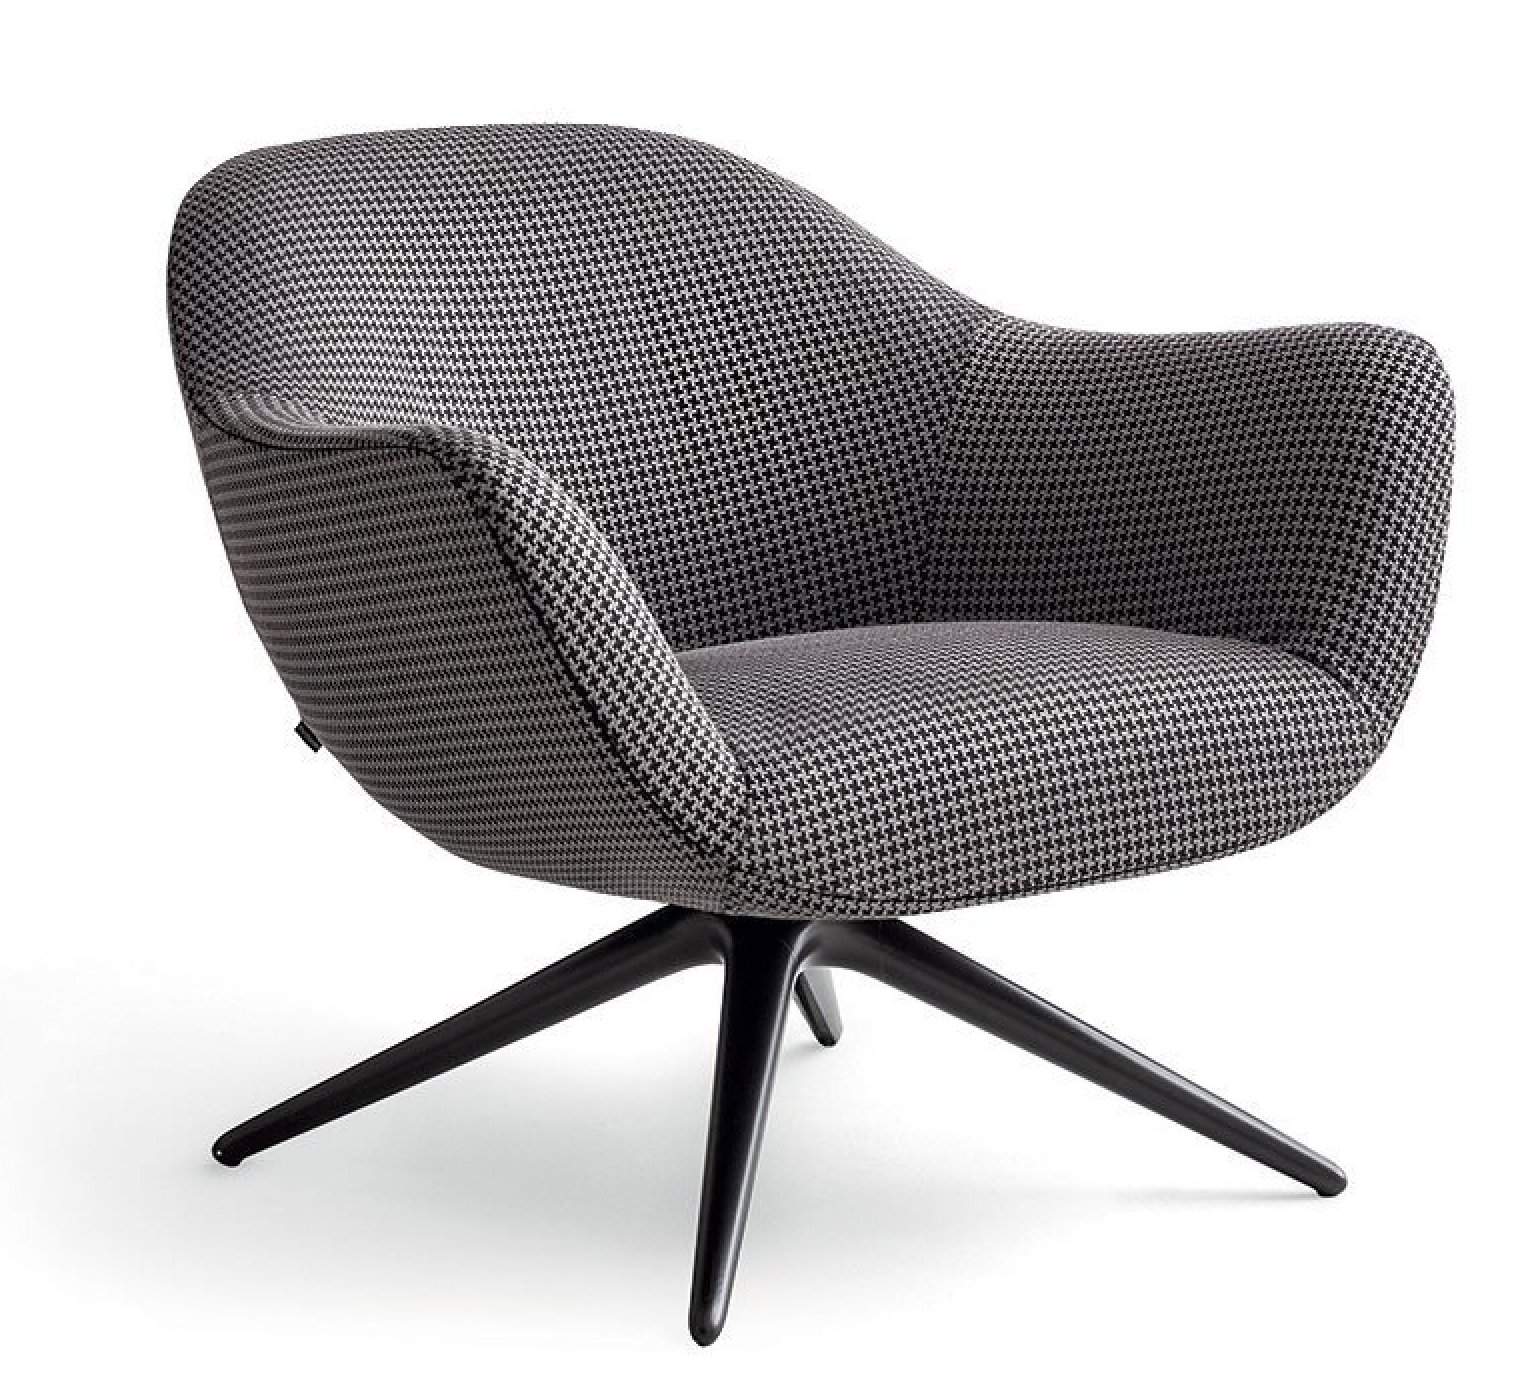 Mad Chair Armchair by Marcel Wanders